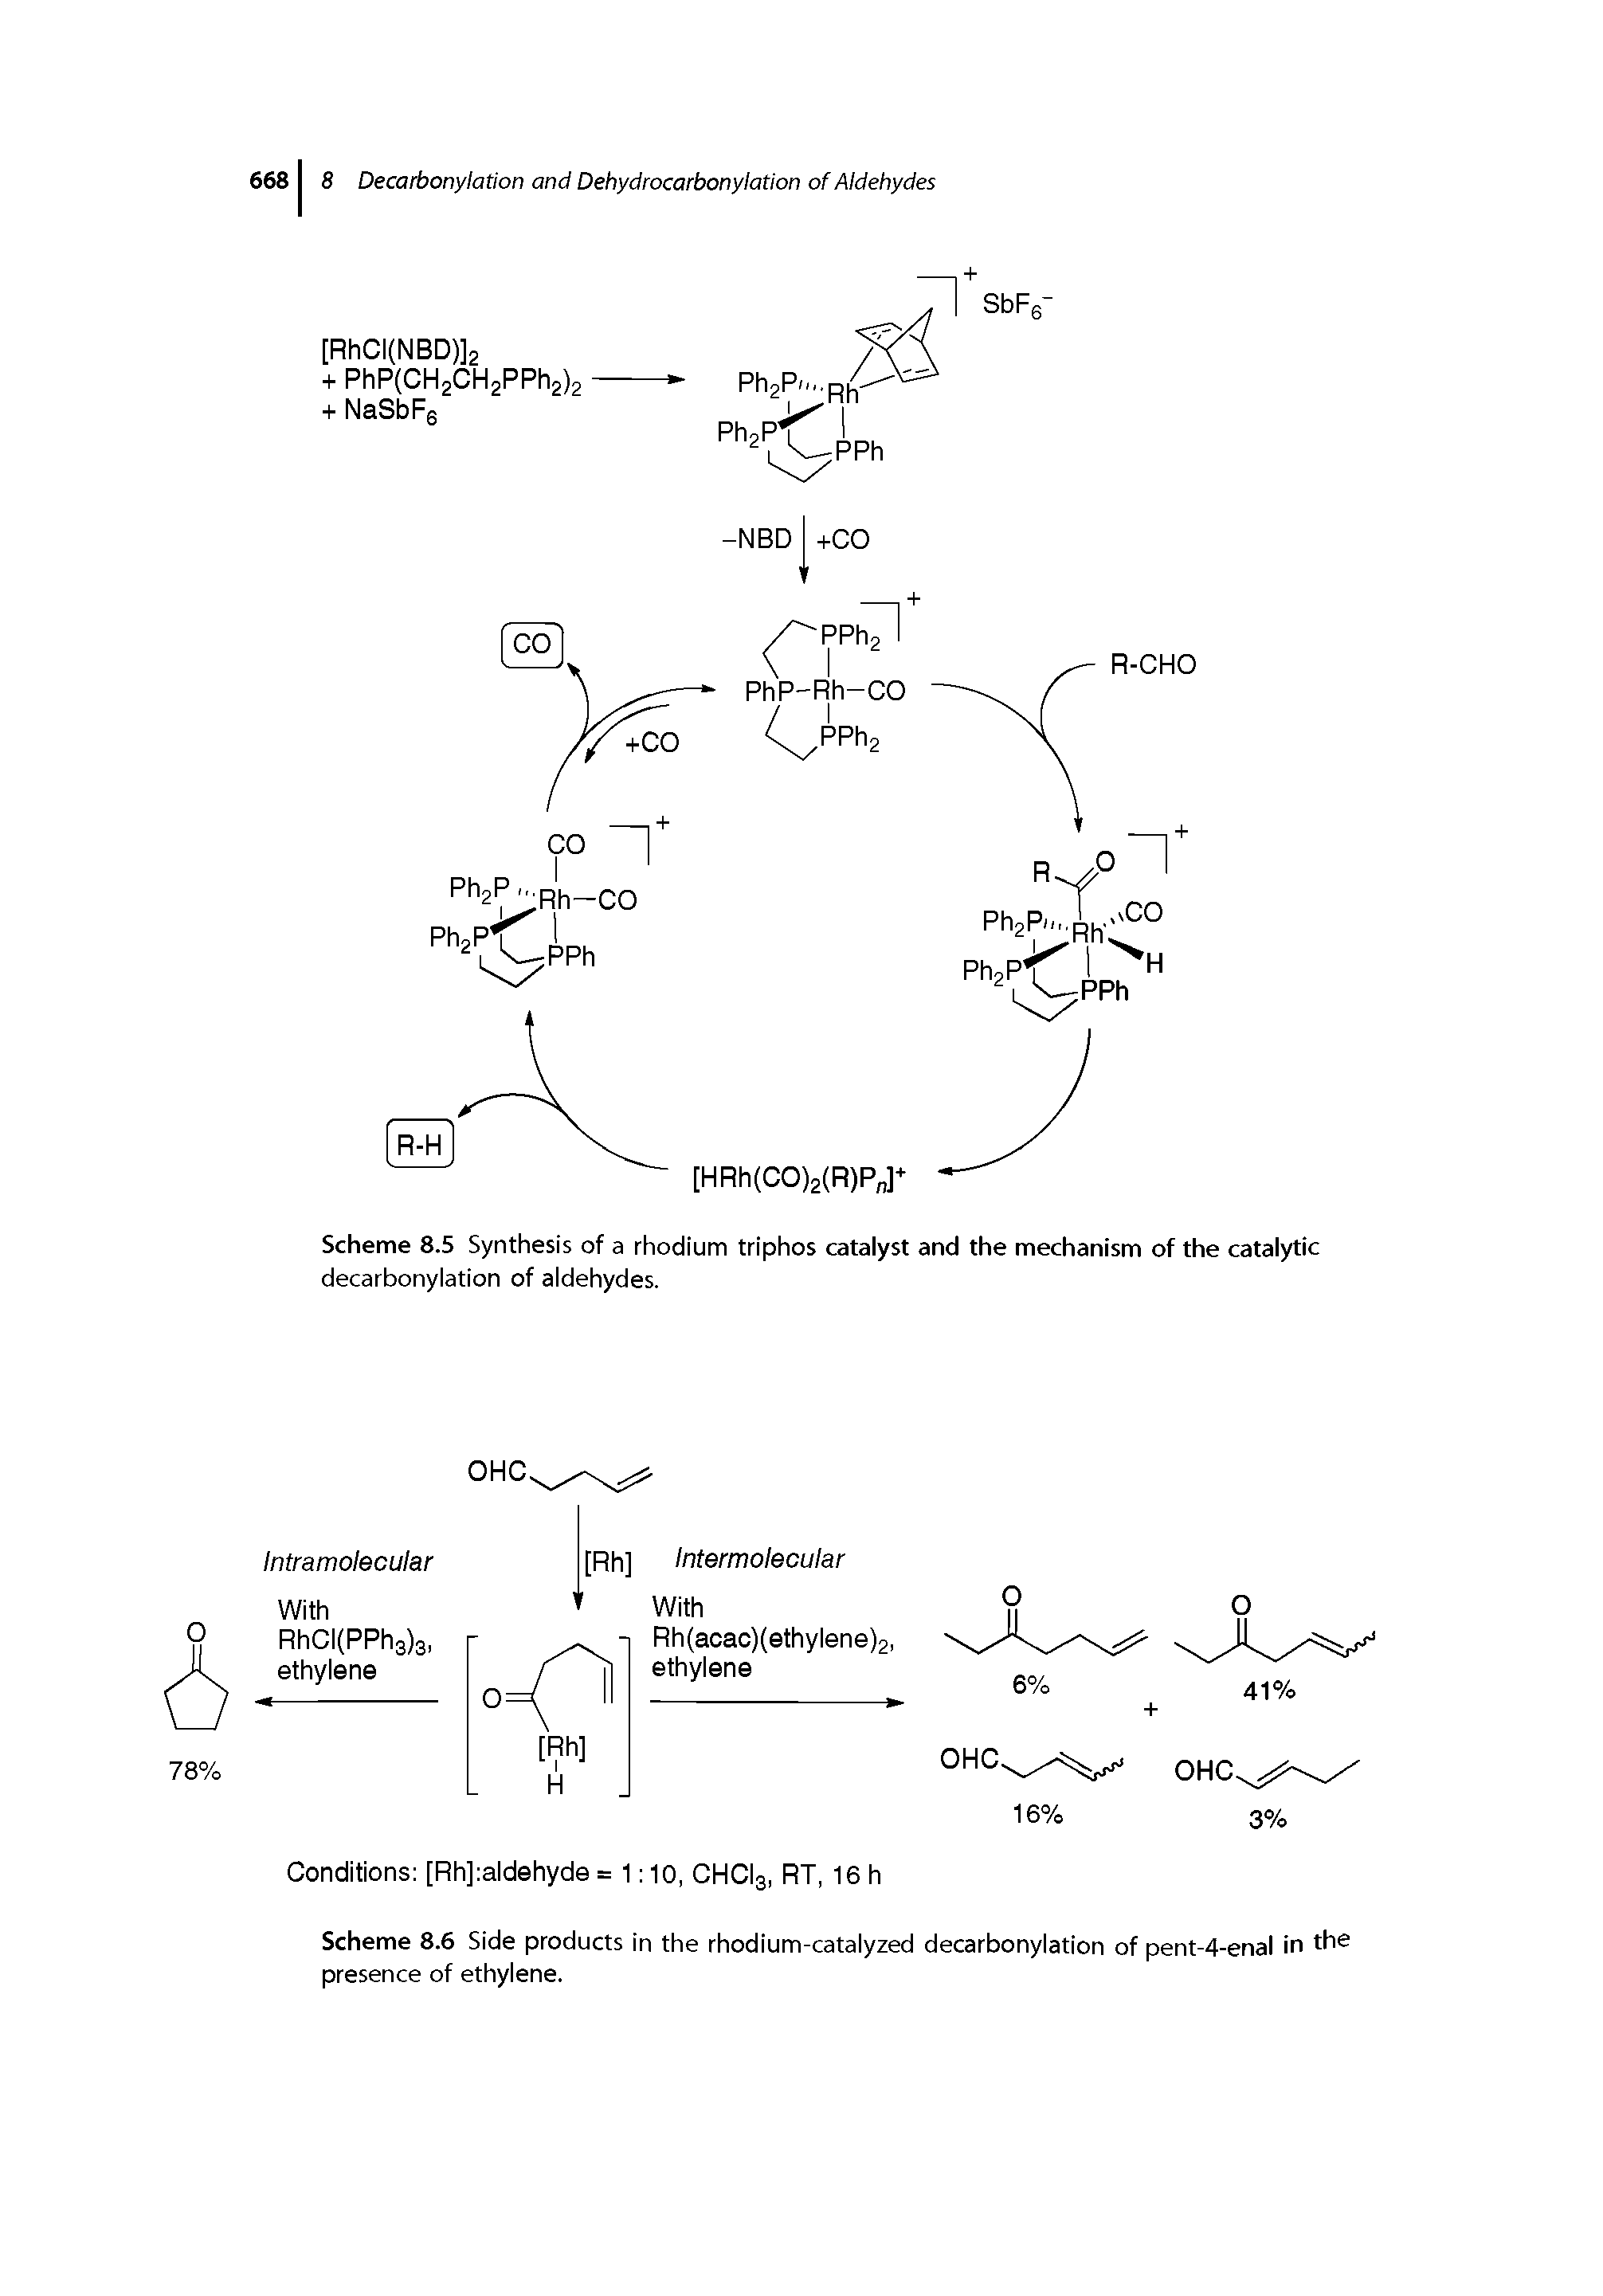 Scheme 8.6 Side products in the rhodium-catalyzed decarbonylation of pent-4-enal in hs presence of ethylene.